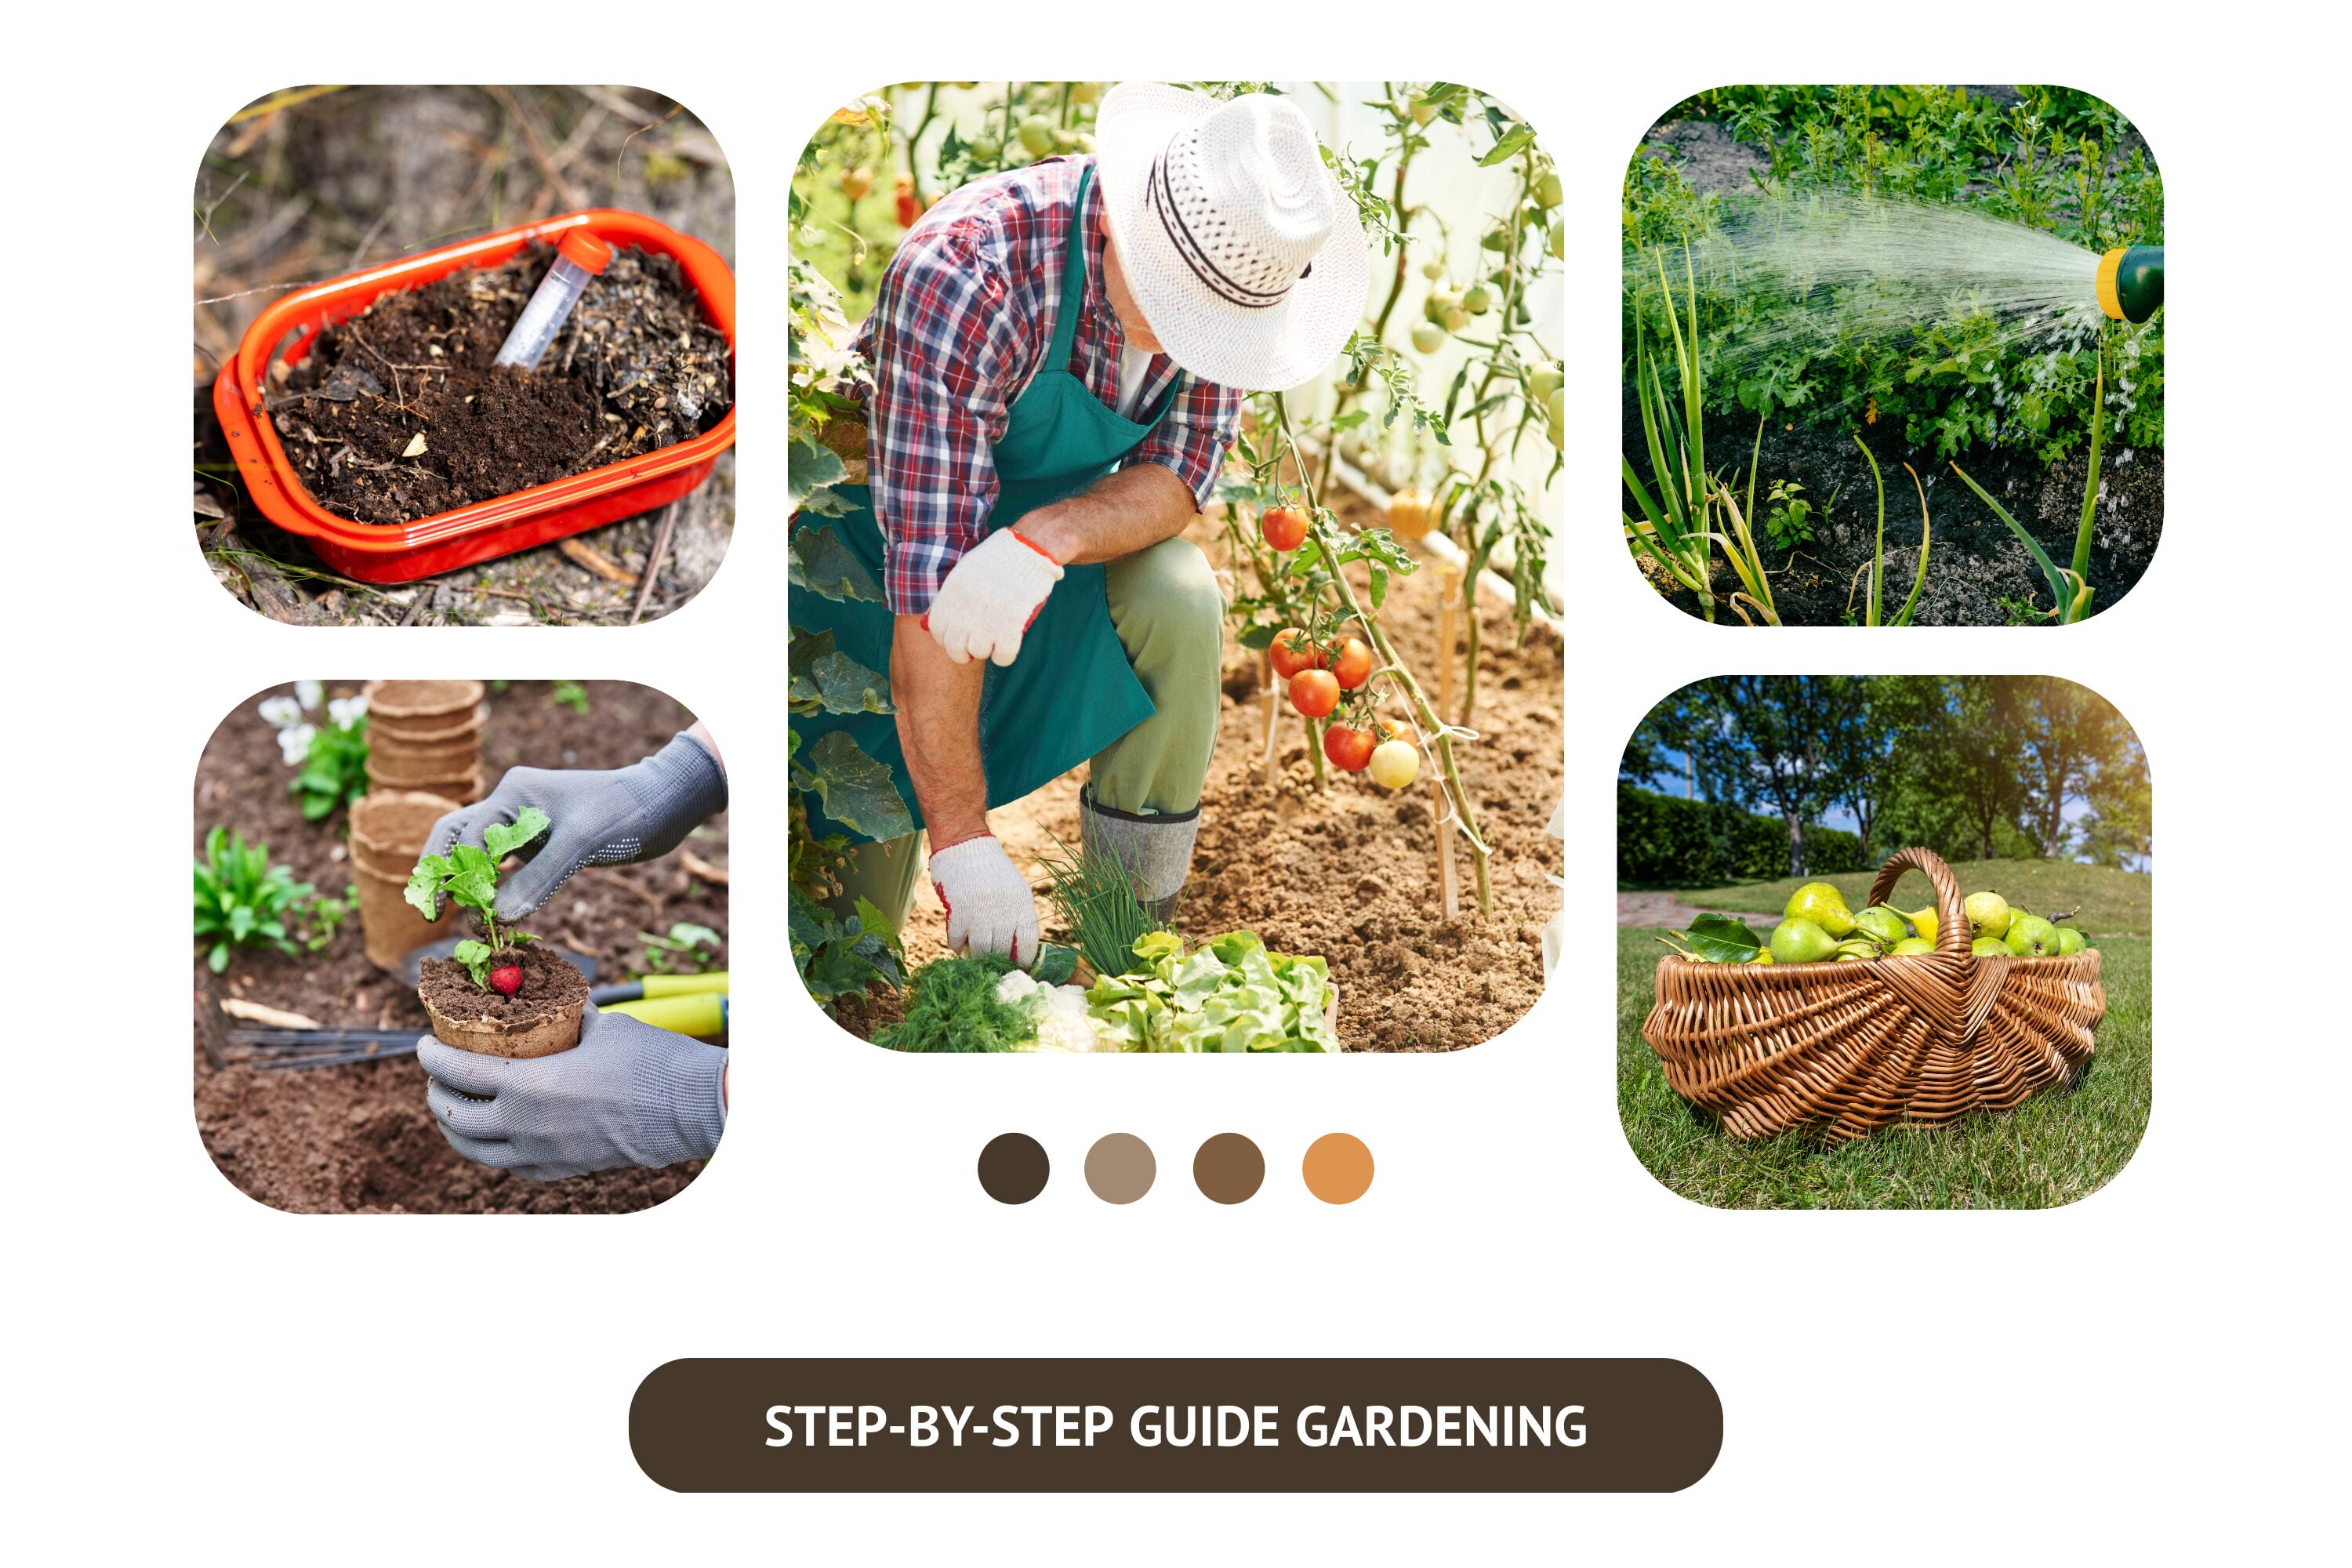 Gardening Step-by-Step Guide